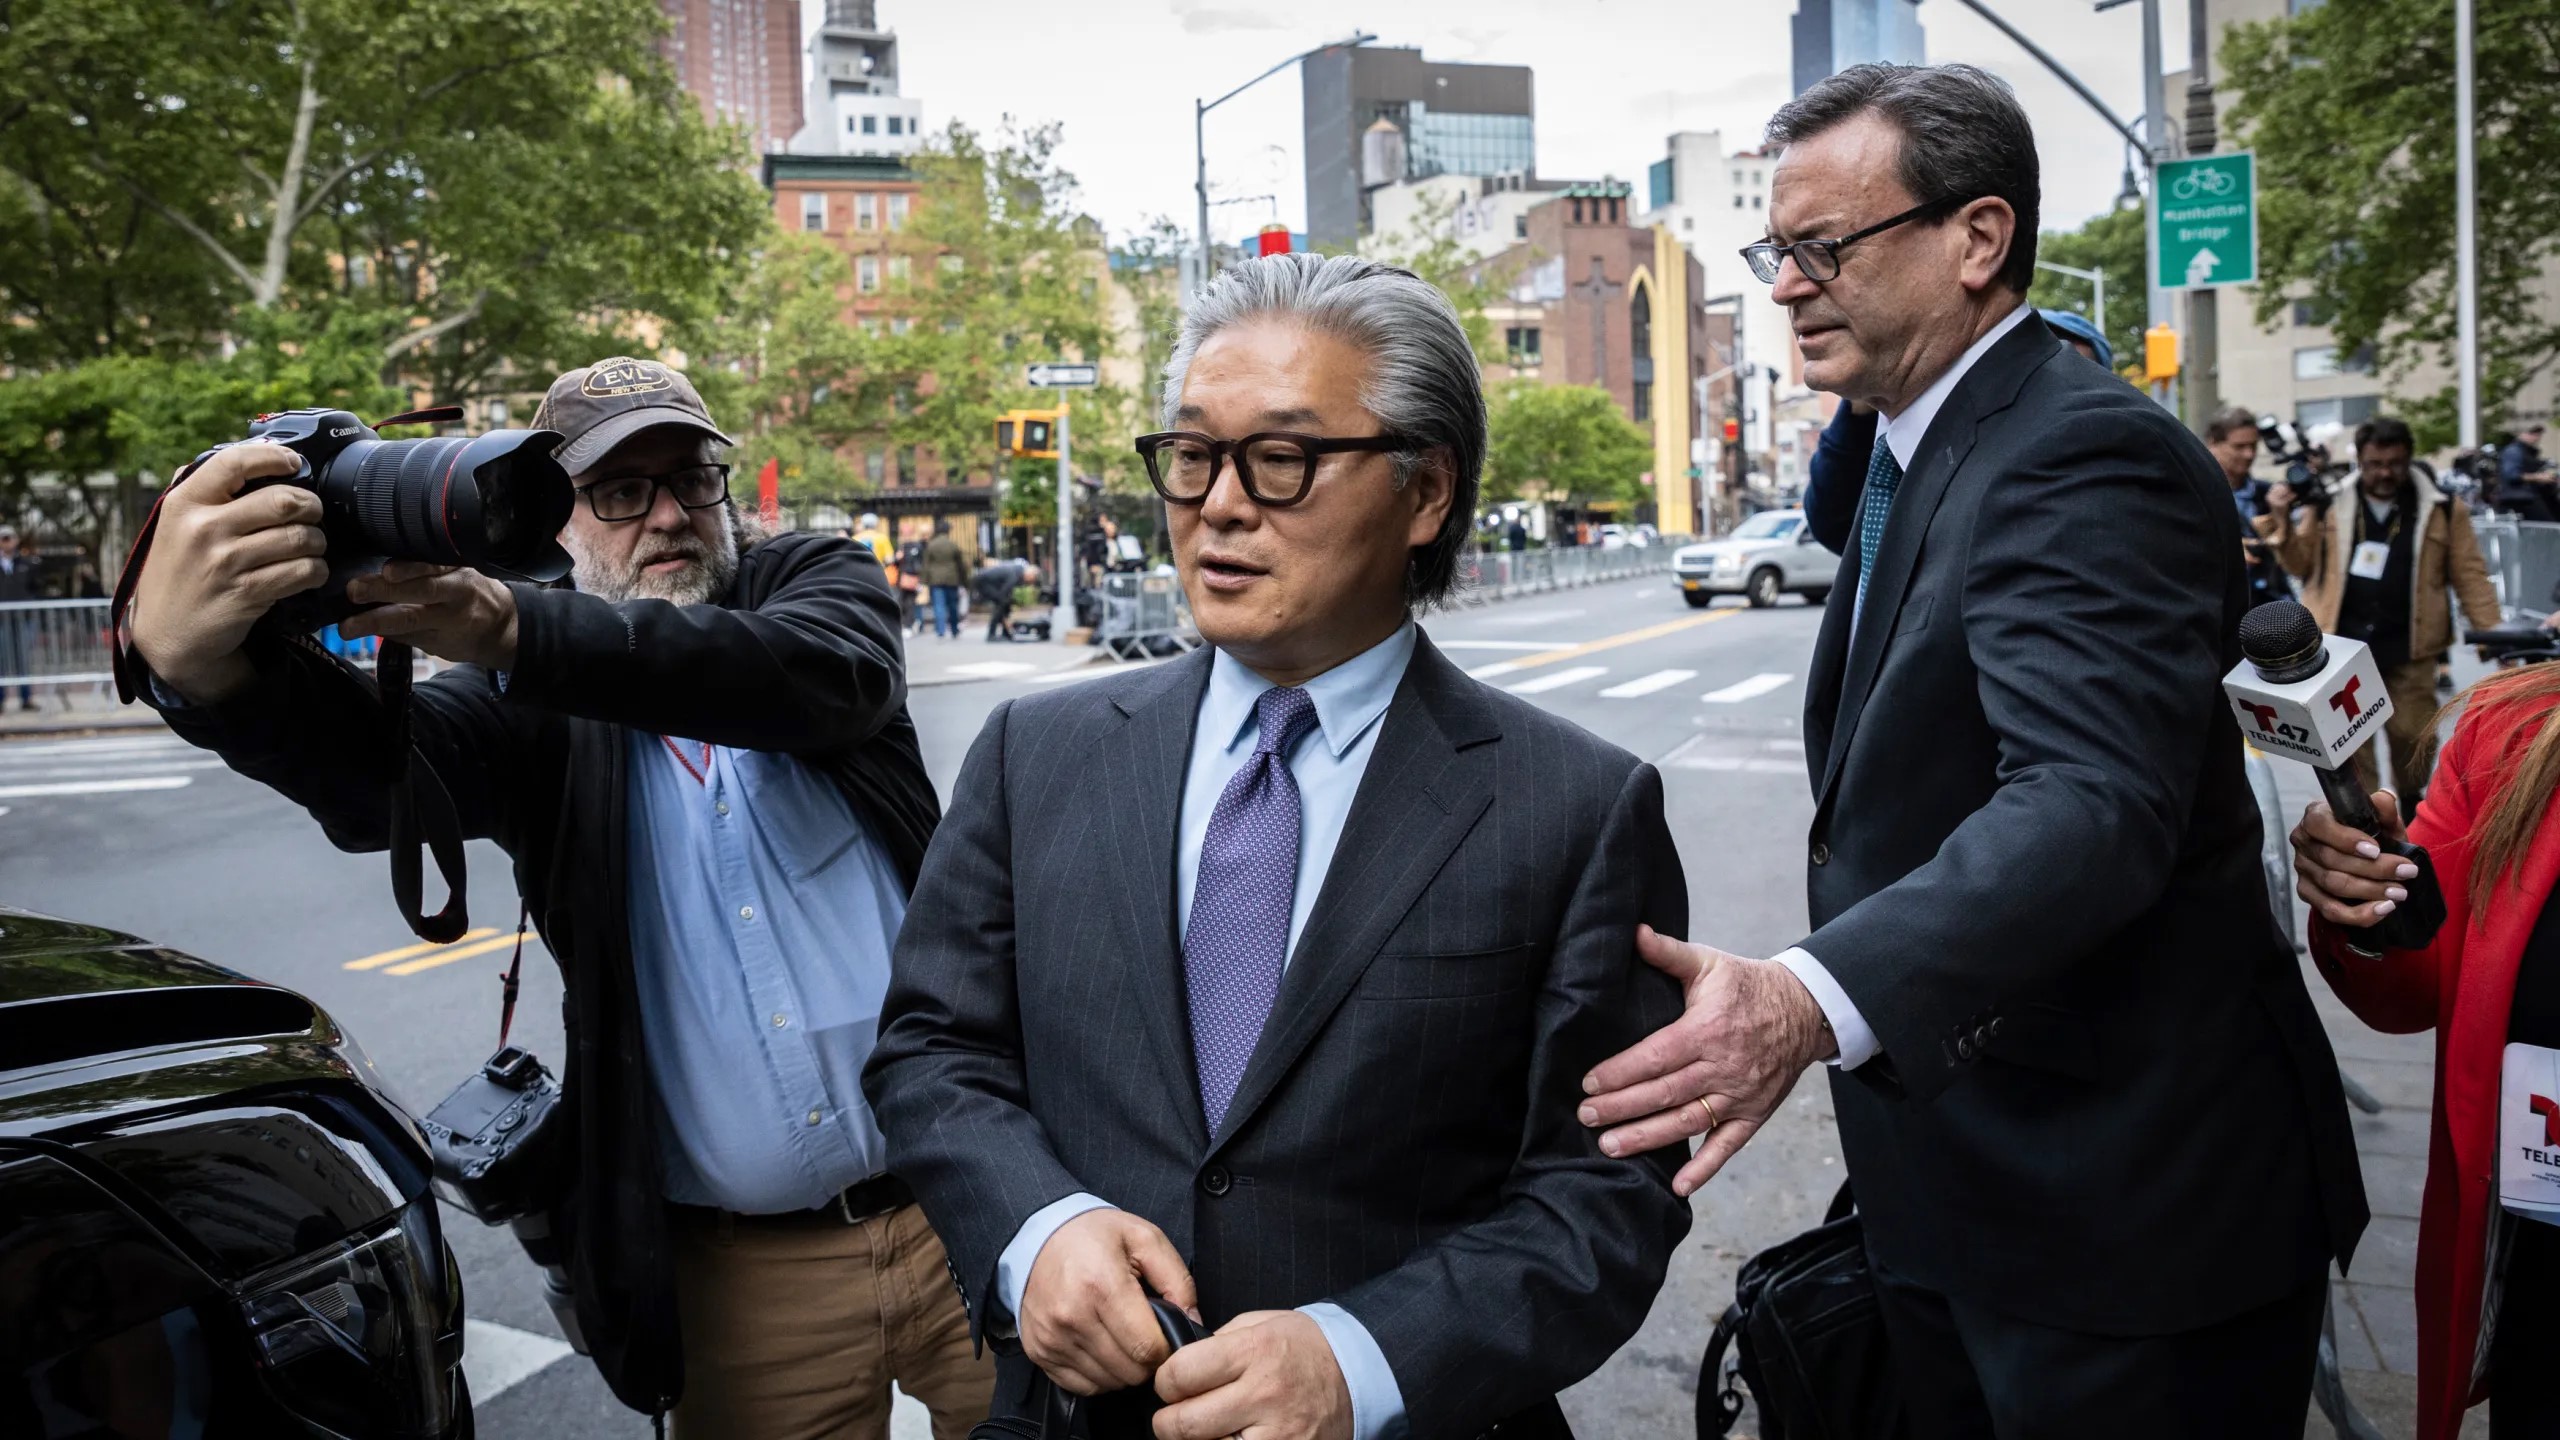 Bill Hwang, founder of Archegos Capital Management, exits Manhattan federal court after the first day of his corruption trial on Monday, May 13, 2024 

Image Source: KARK 